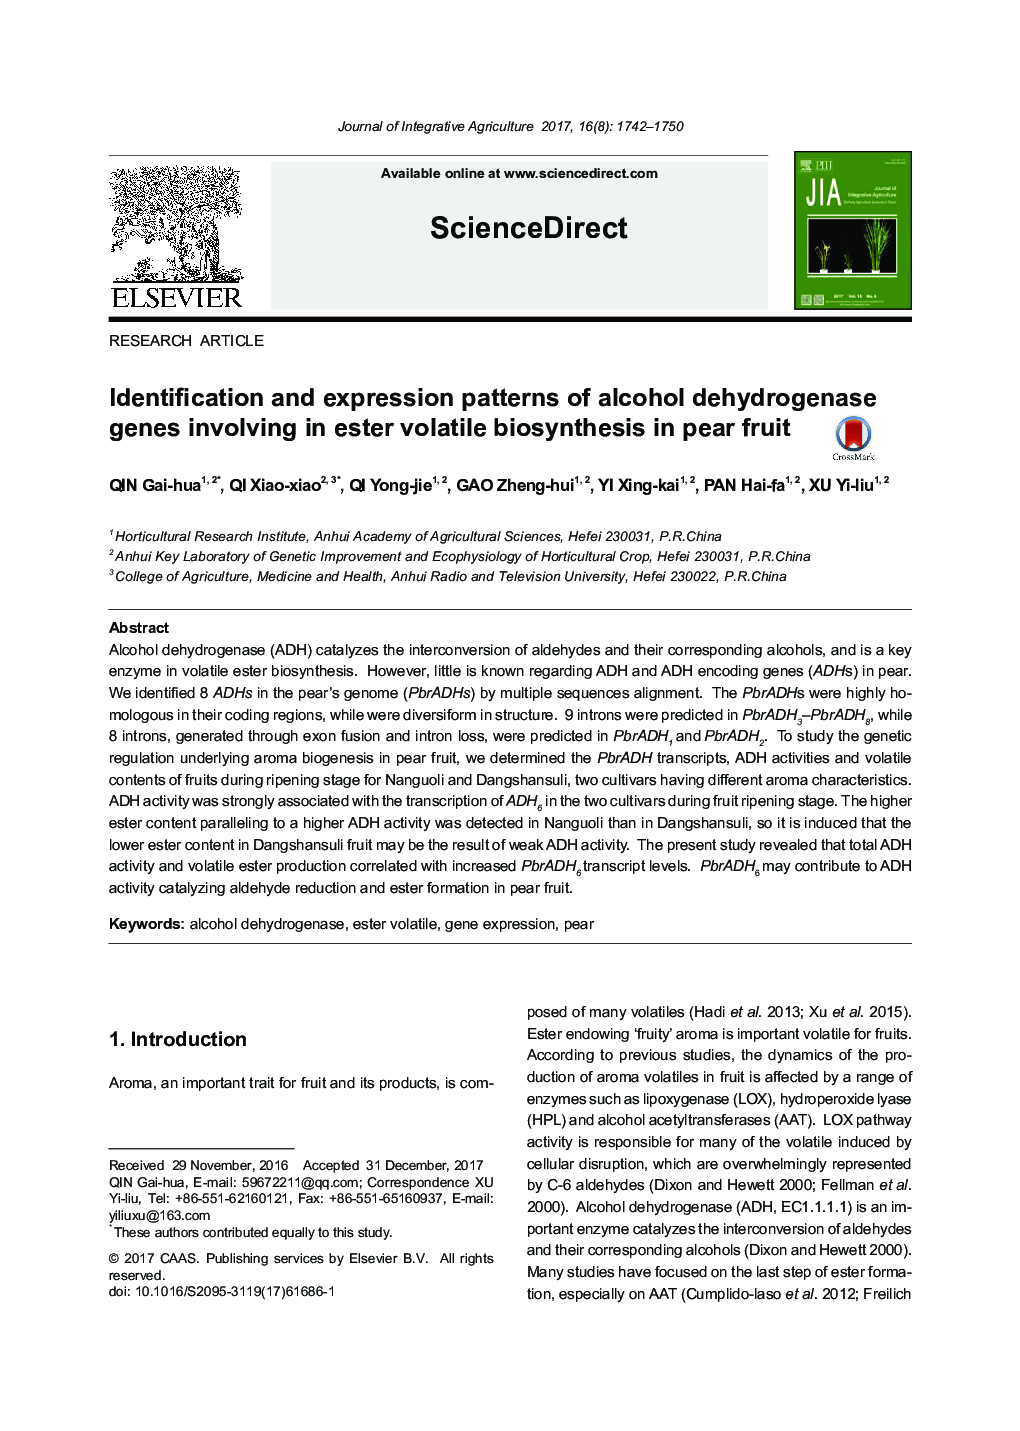 Identification and expression patterns of alcohol dehydrogenase genes involving in ester volatile biosynthesis in pear fruit